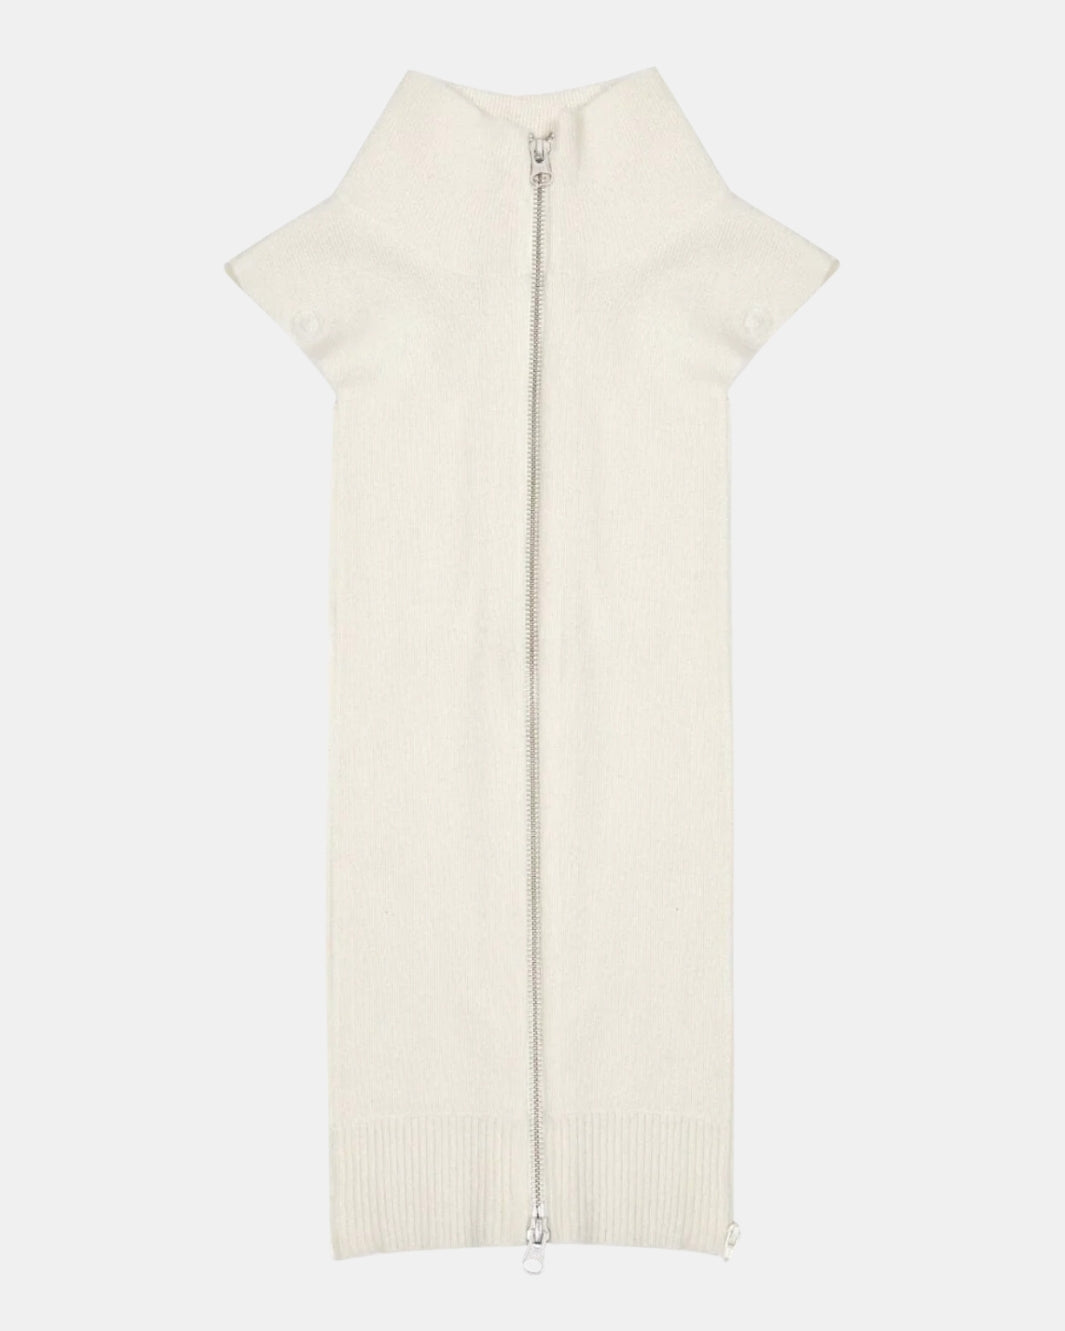 CASHMERE UPTOWN DICKEY IN IVORY - Romi Boutique